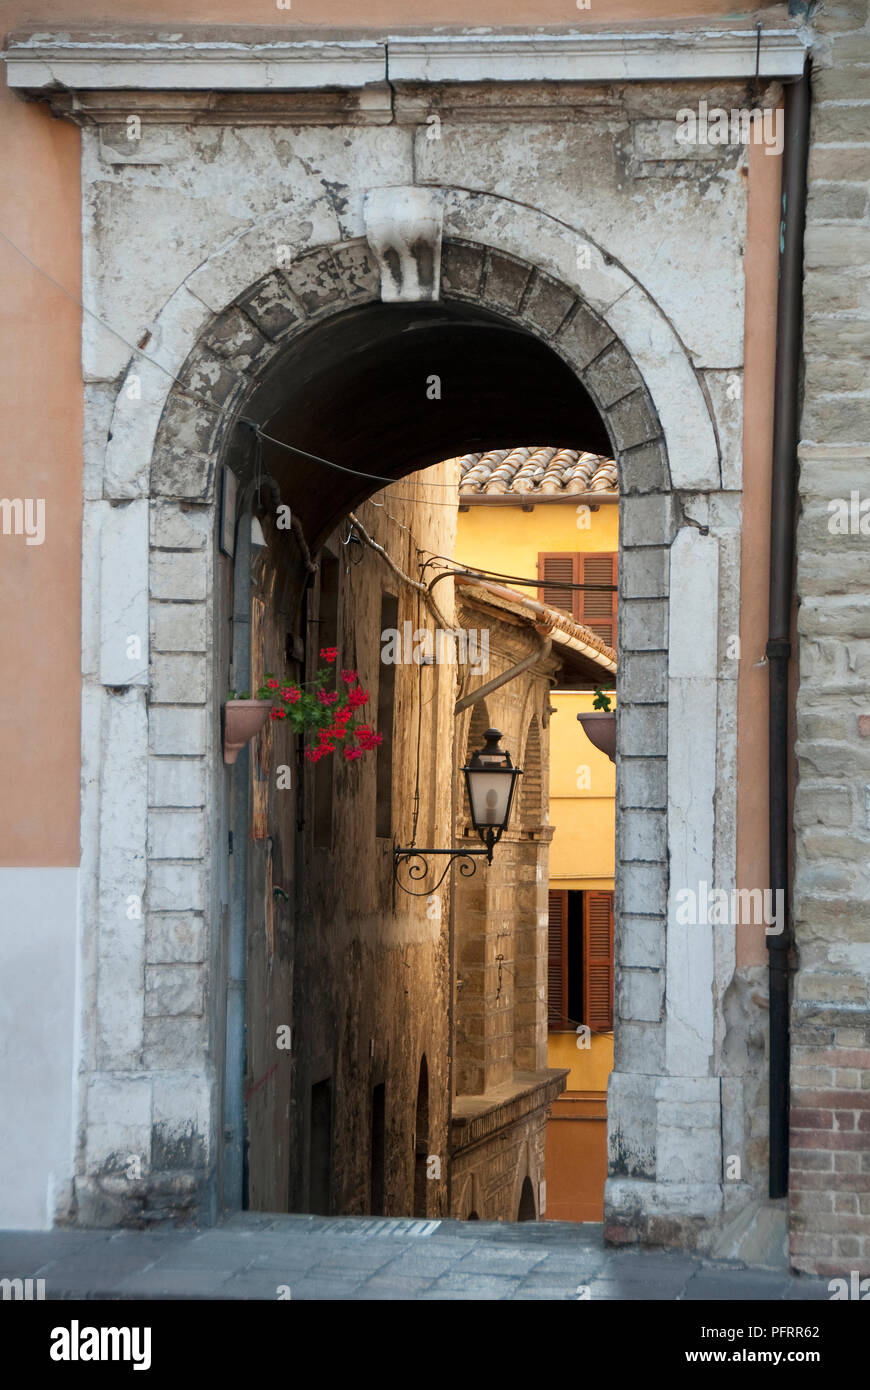 Italy, Marche, Arcevia, old arched entrance leading down to street below Stock Photo